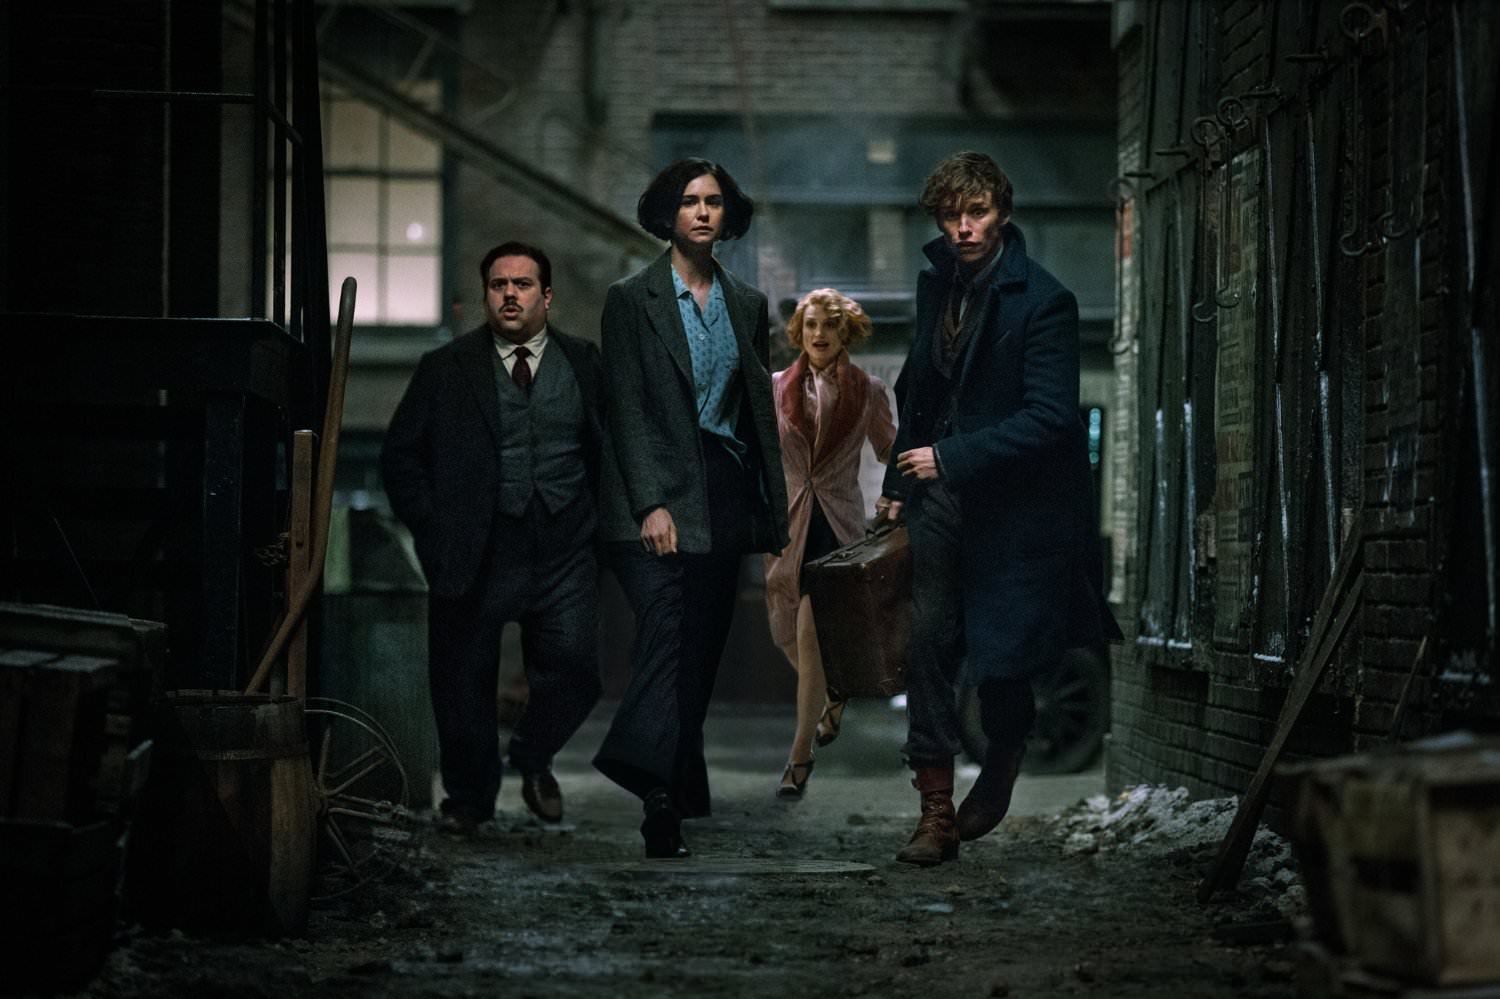 fantastic-beasts-and-where-to-find-them-header-image.jpg